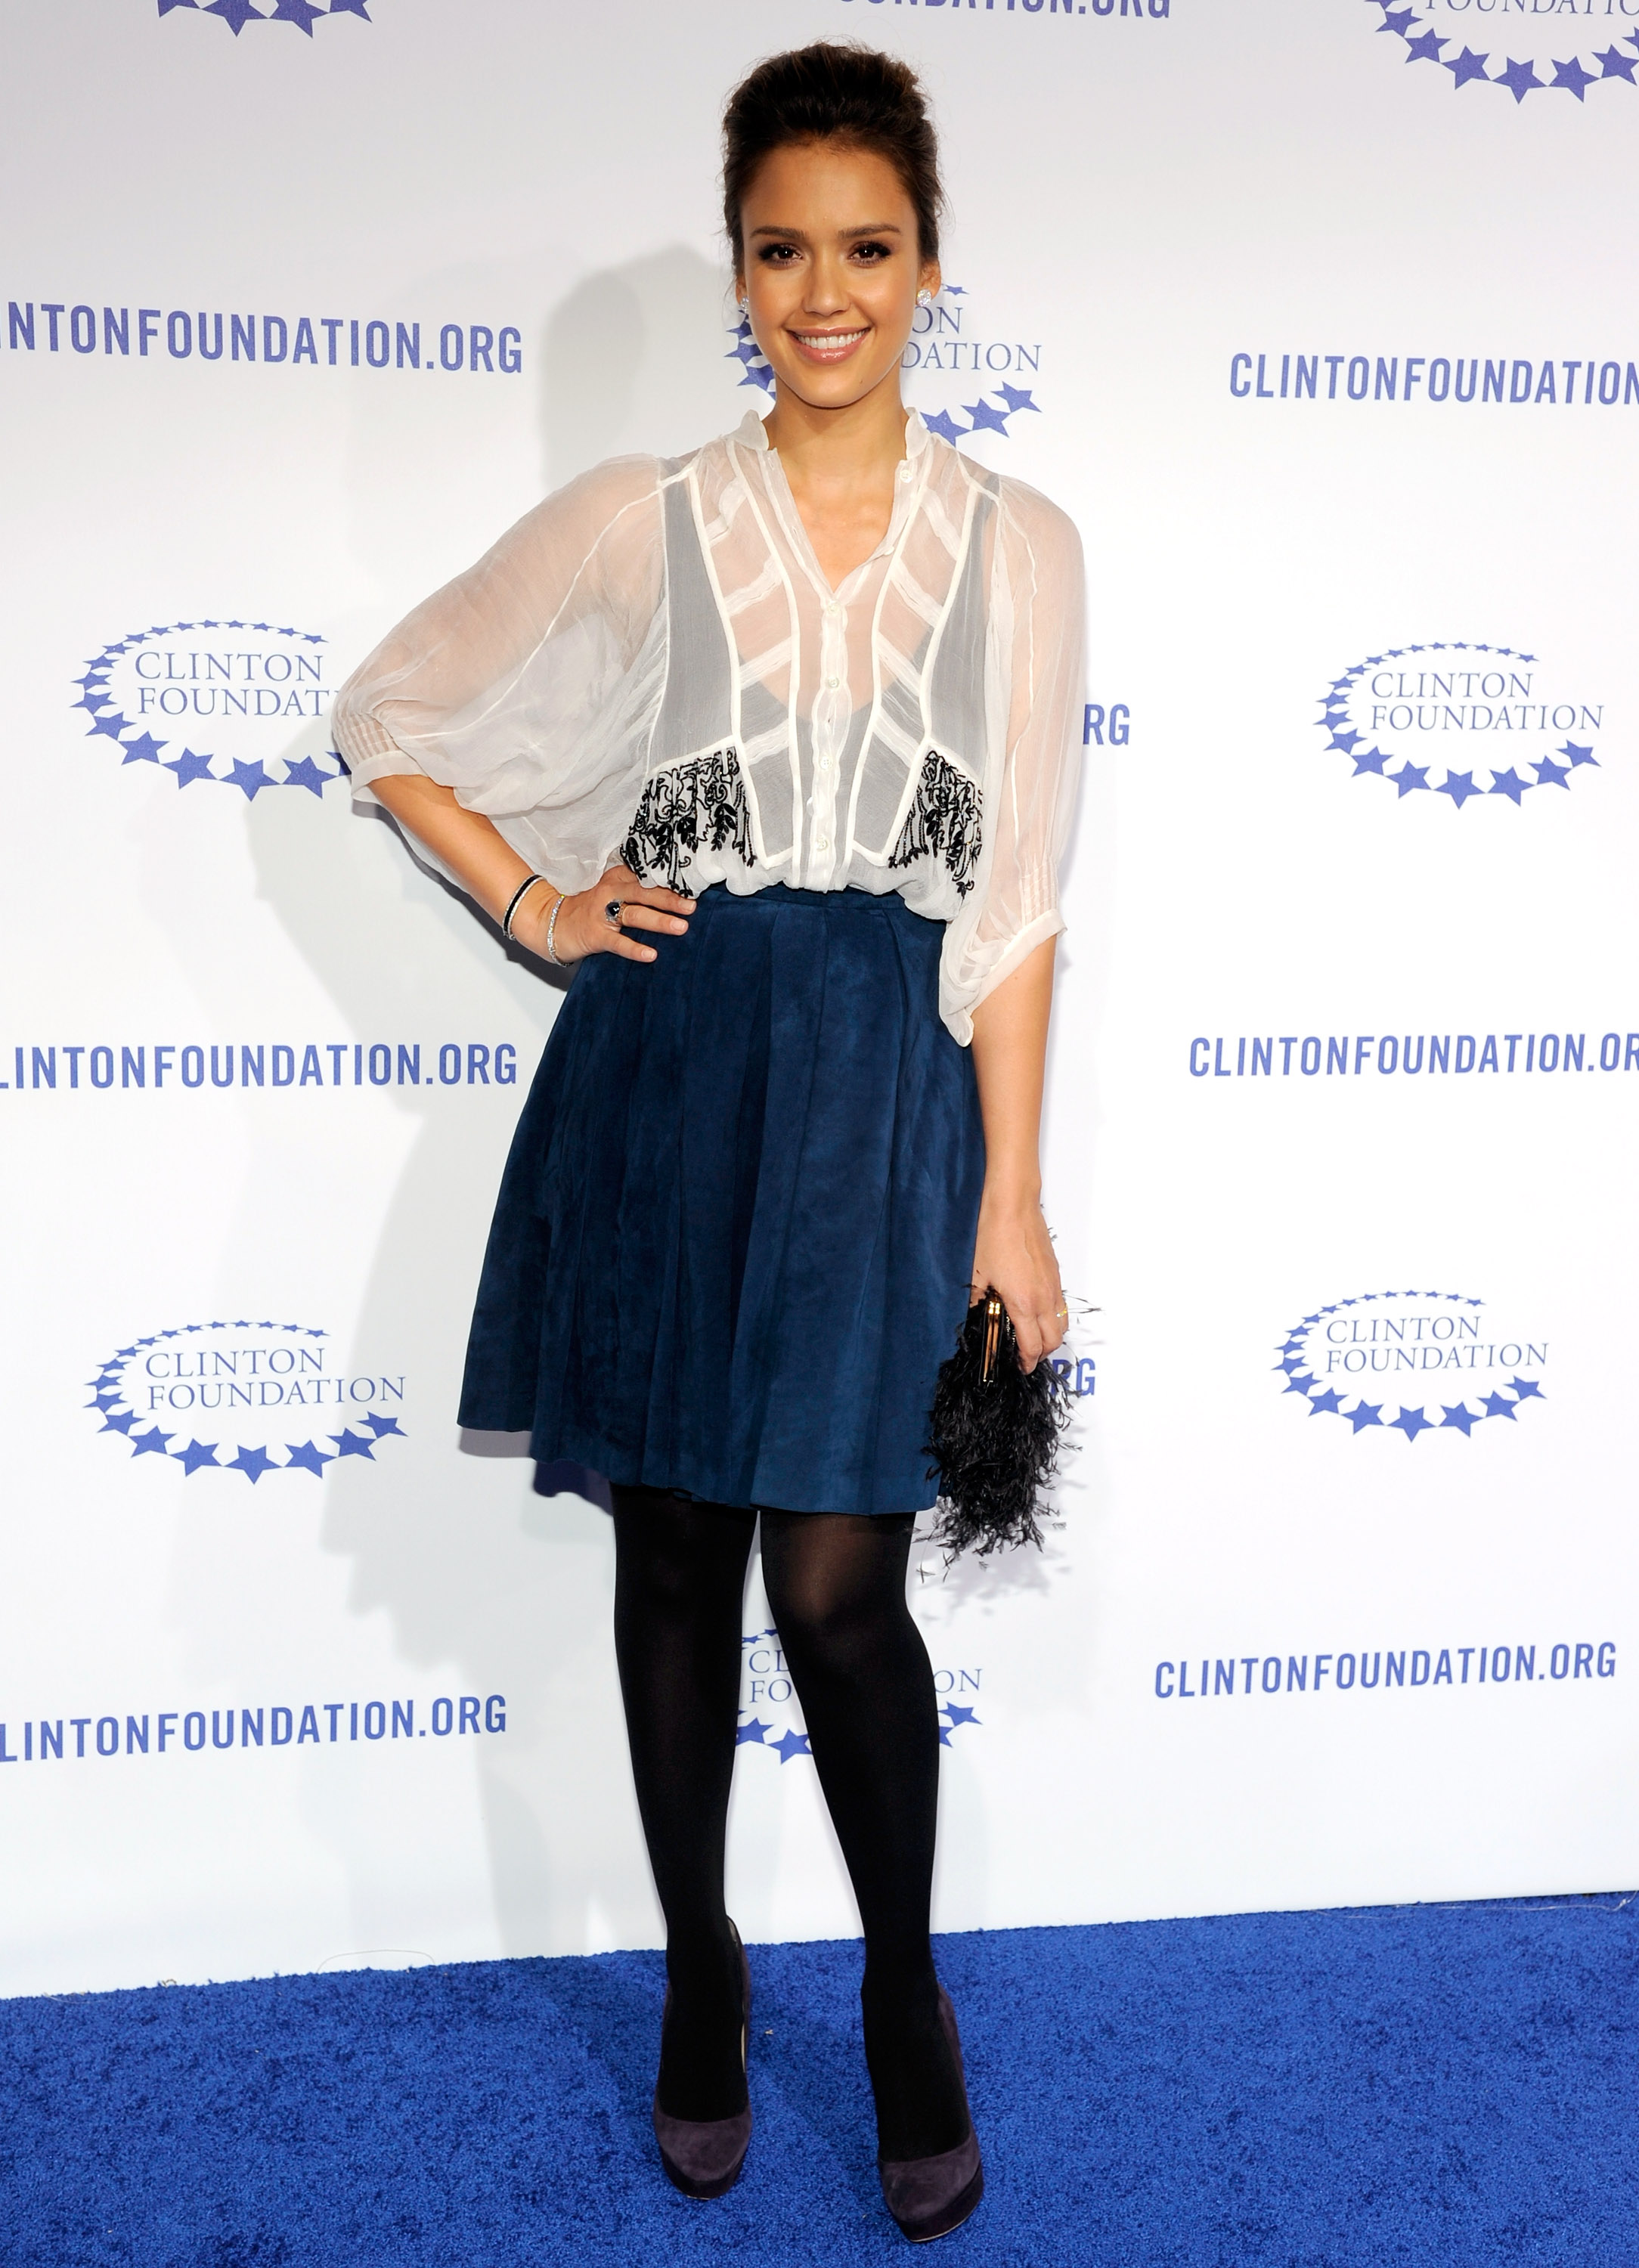 Jessica Alba arrives to the Clinton Foundation's _A Decade of Difference_ Gala in Beverly Hills on 14th October 2011